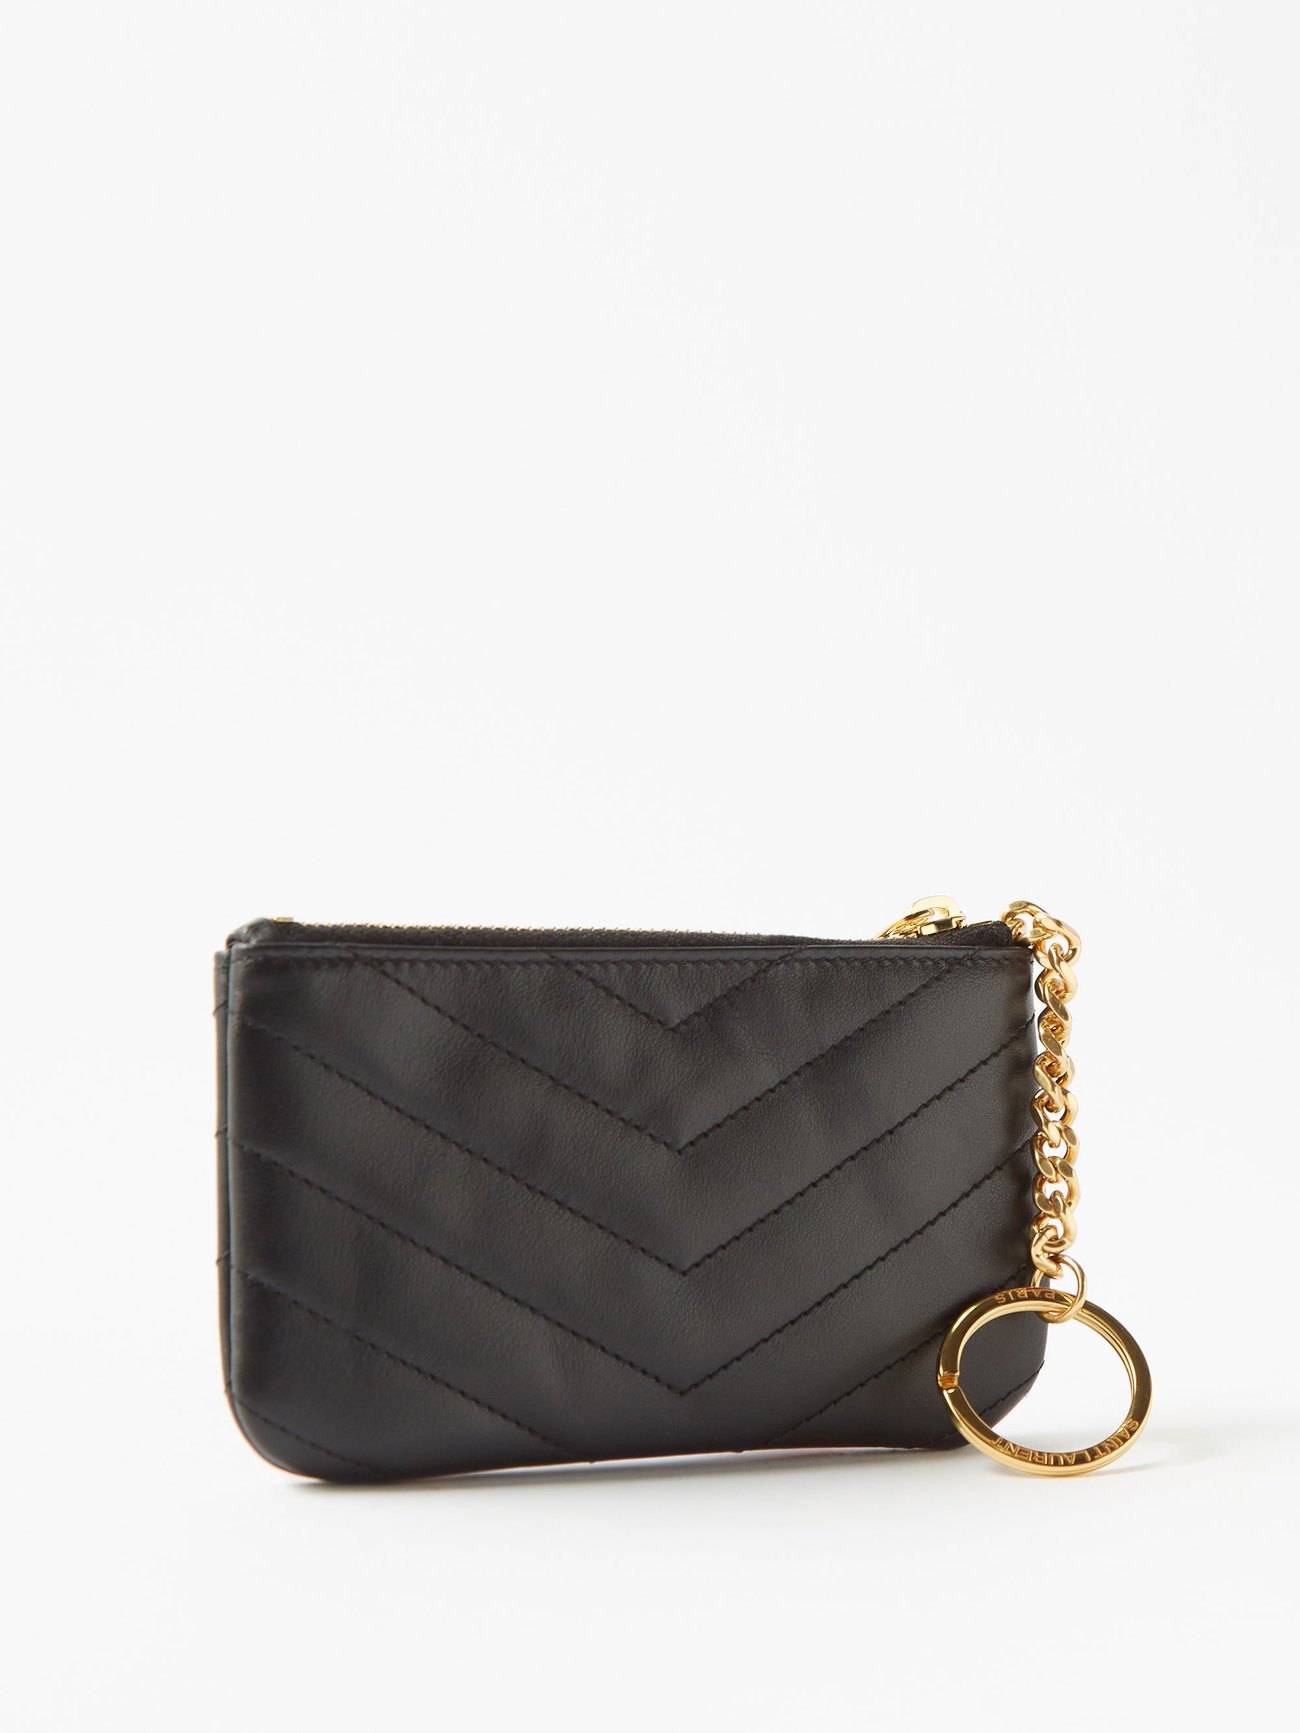 Saint Laurent Key Pouch - DUET Curated Consignment™